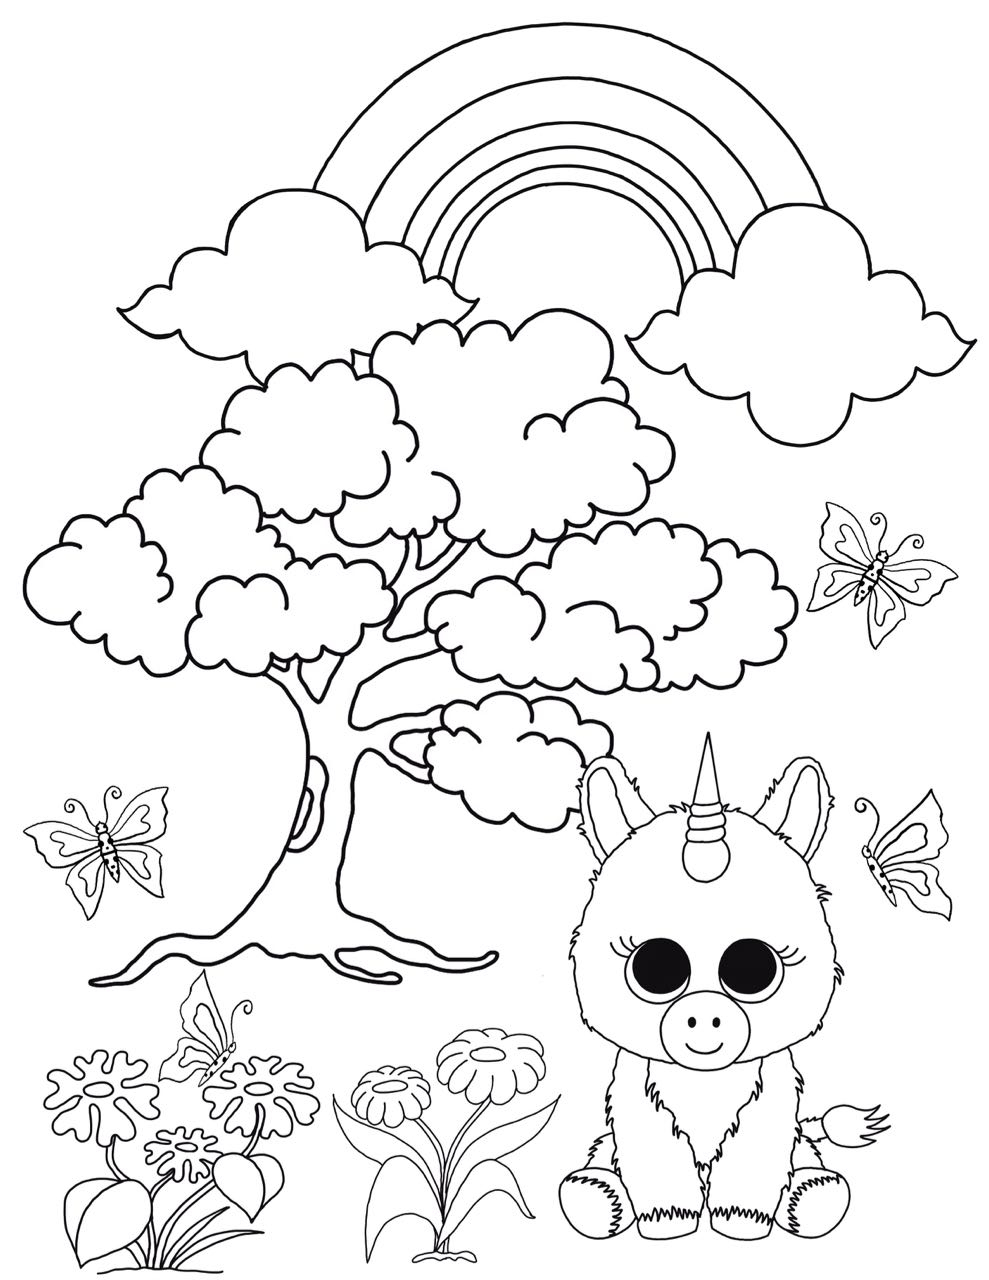 Free Beanie Boo Coloring Pages Download &amp;amp; Print: Cats, Dogs And Unicorns - Free Printable Beanie Boo Coloring Pages